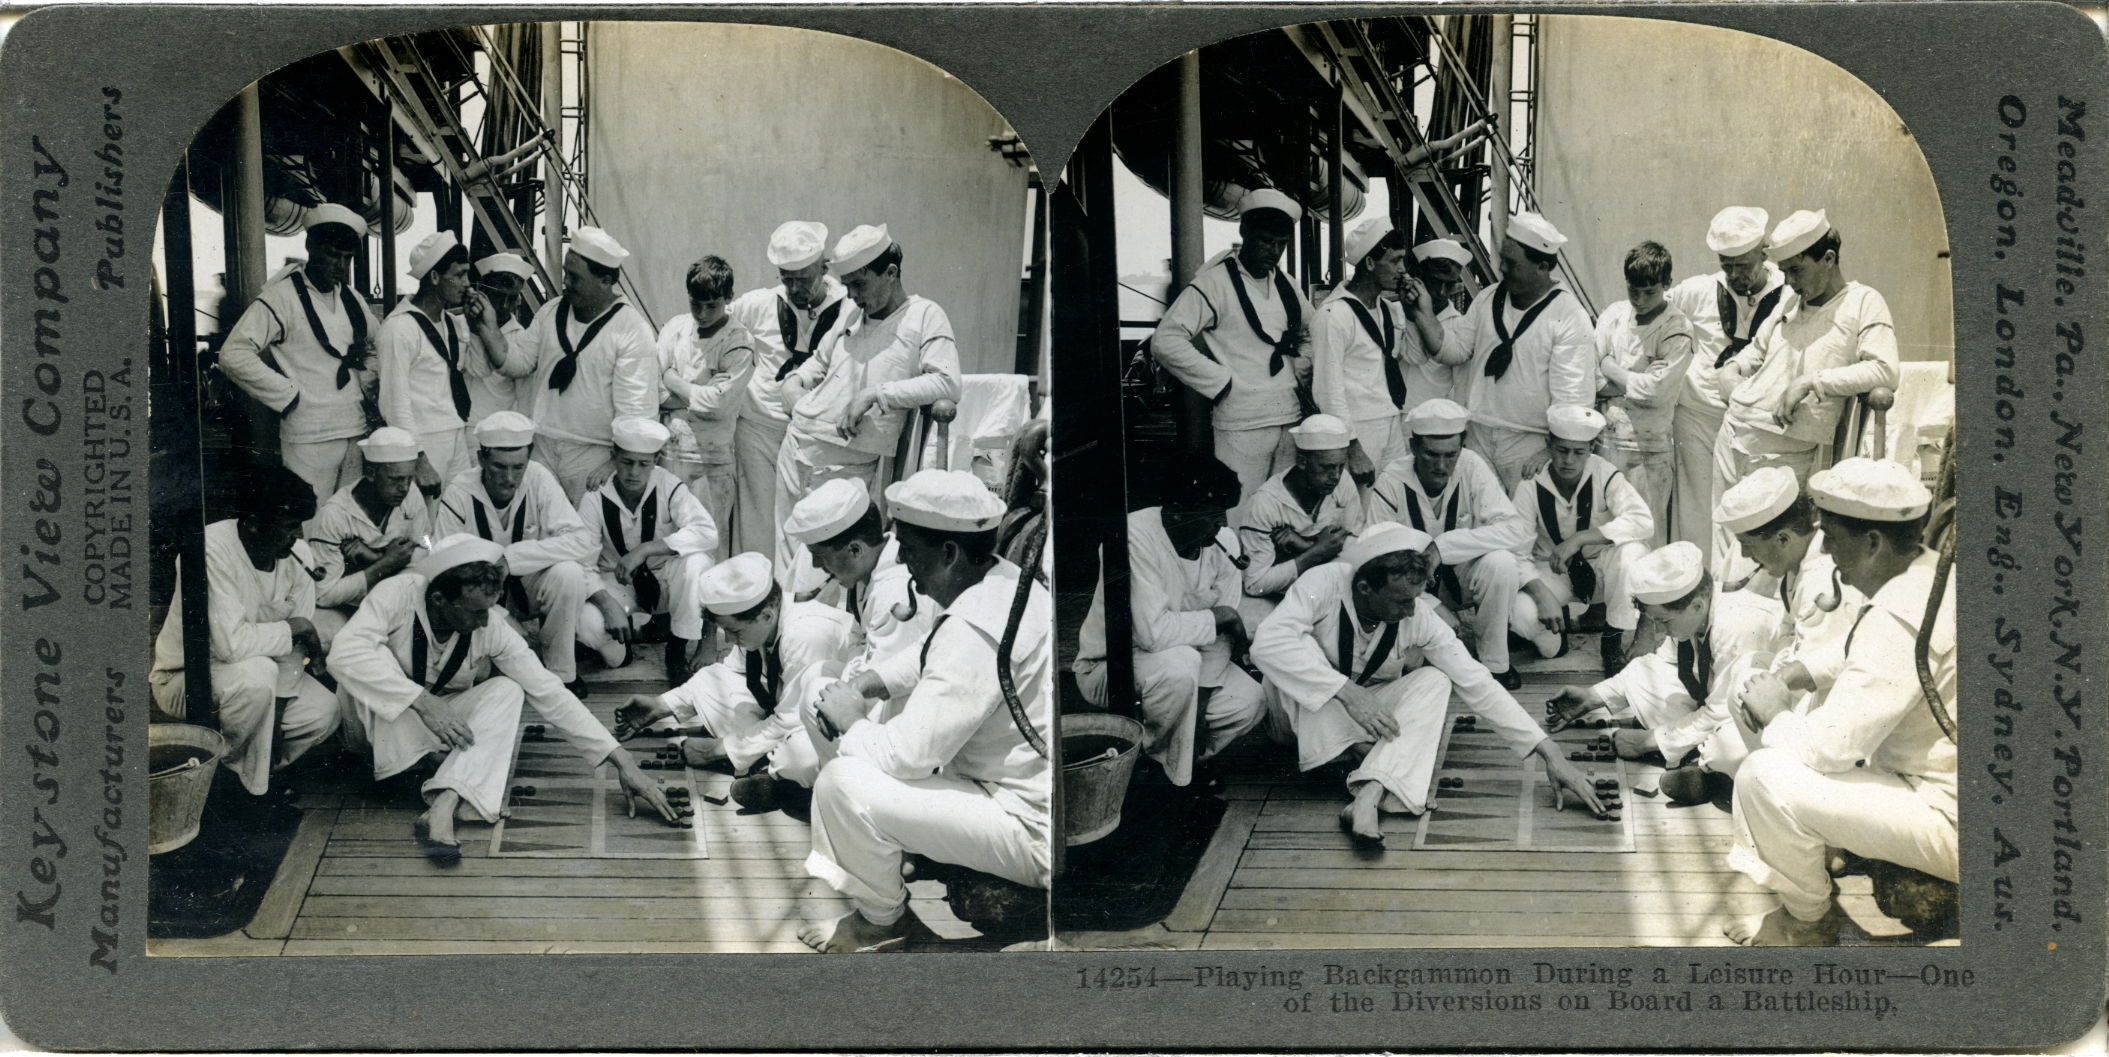 Playing Backgammon During a Leisure Hour--One of the Diversions on Board a Battleship